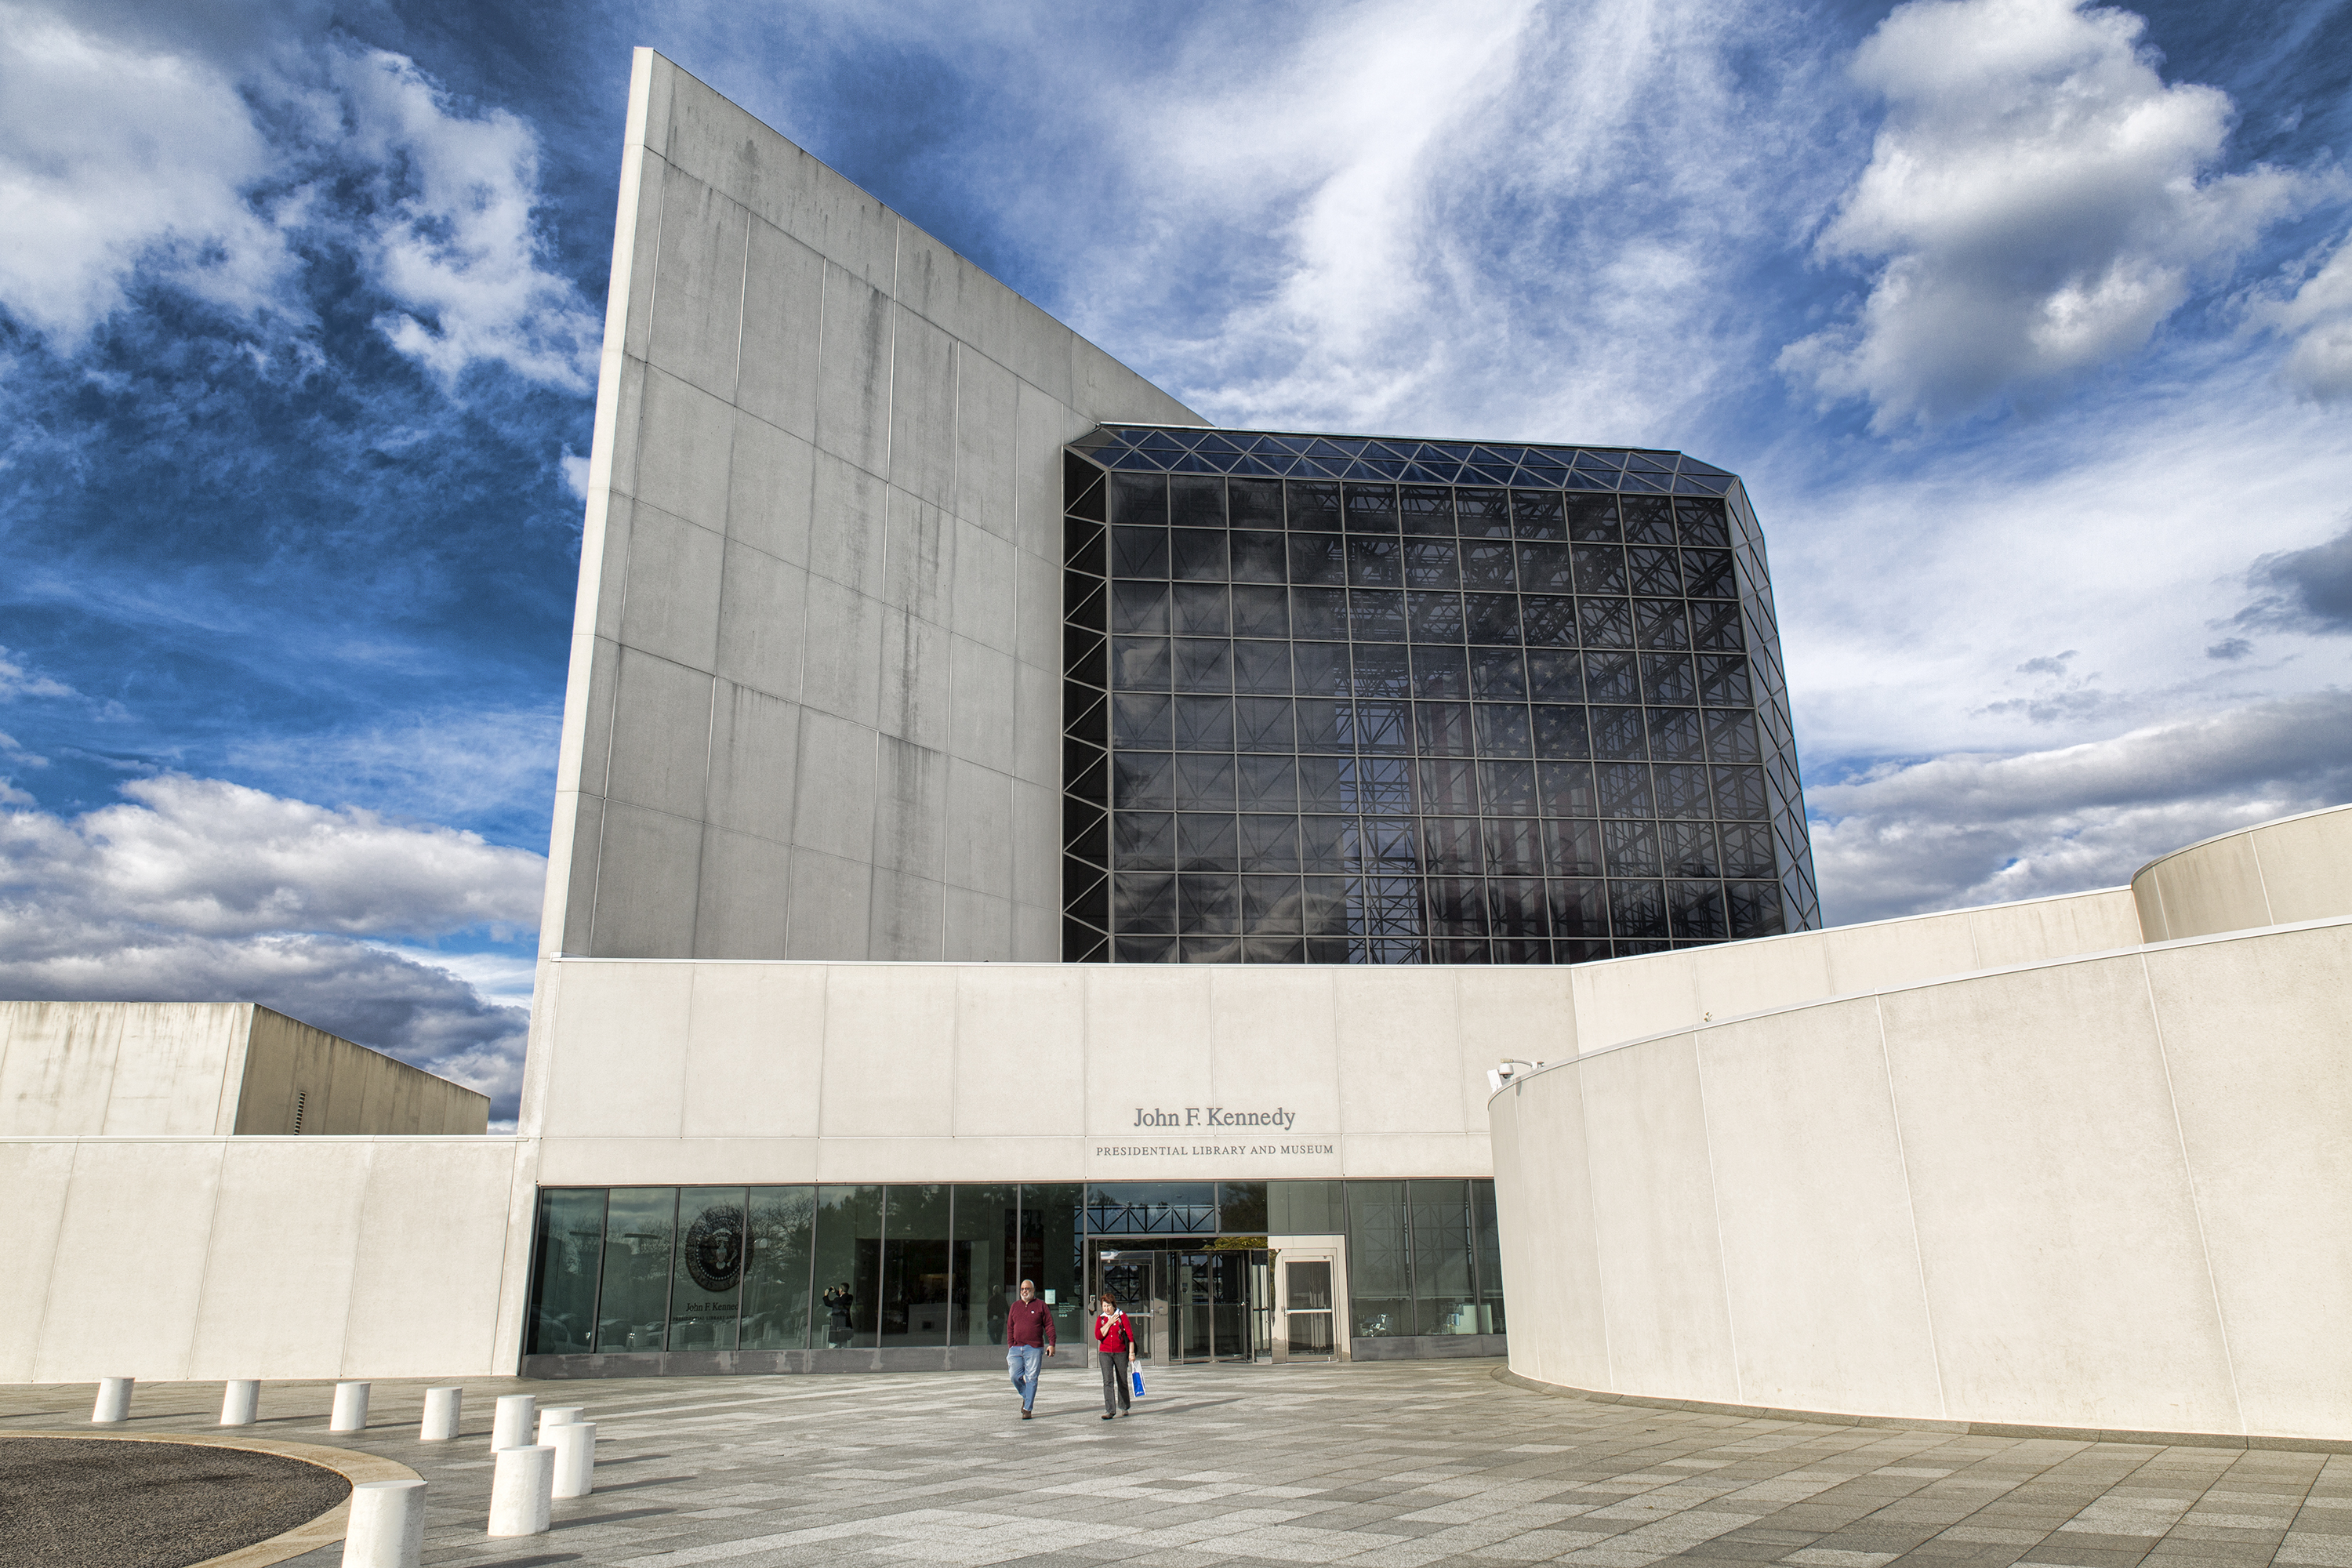 Best Things to Do in Boston - John F Kennedy Presidential Library and Museum in Boston